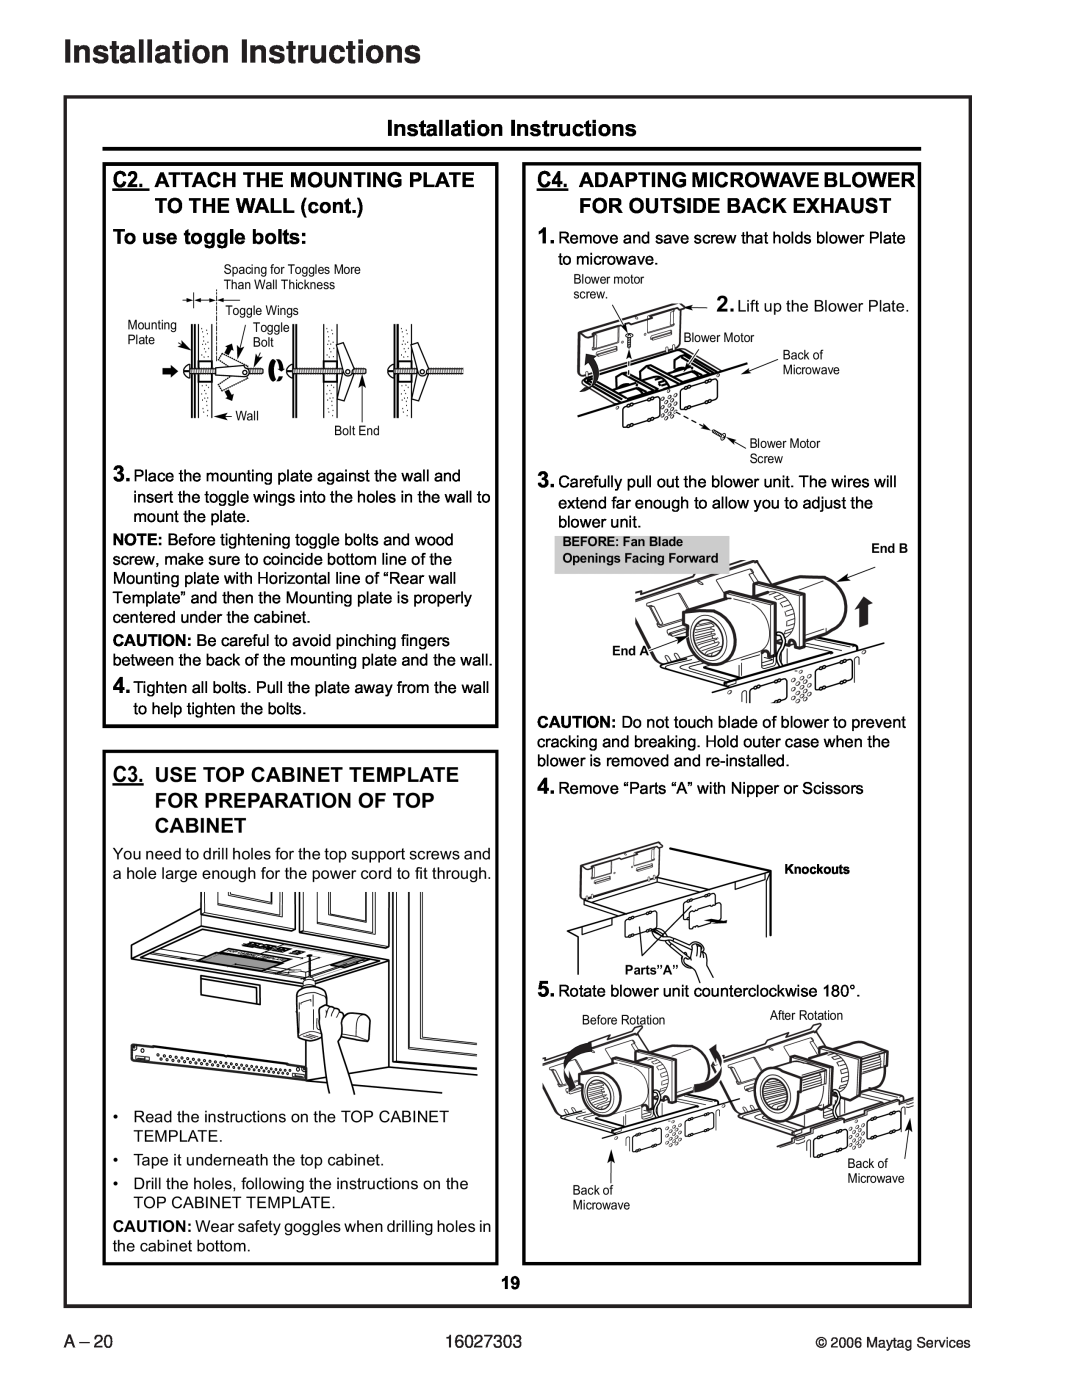 Maytag UMV1152CA C2.ATTACH THE MOUNTING PLATE, TO THE WALL cont, For Outside Back Exhaust, C3.USE TOP CABINET TEMPLATE 